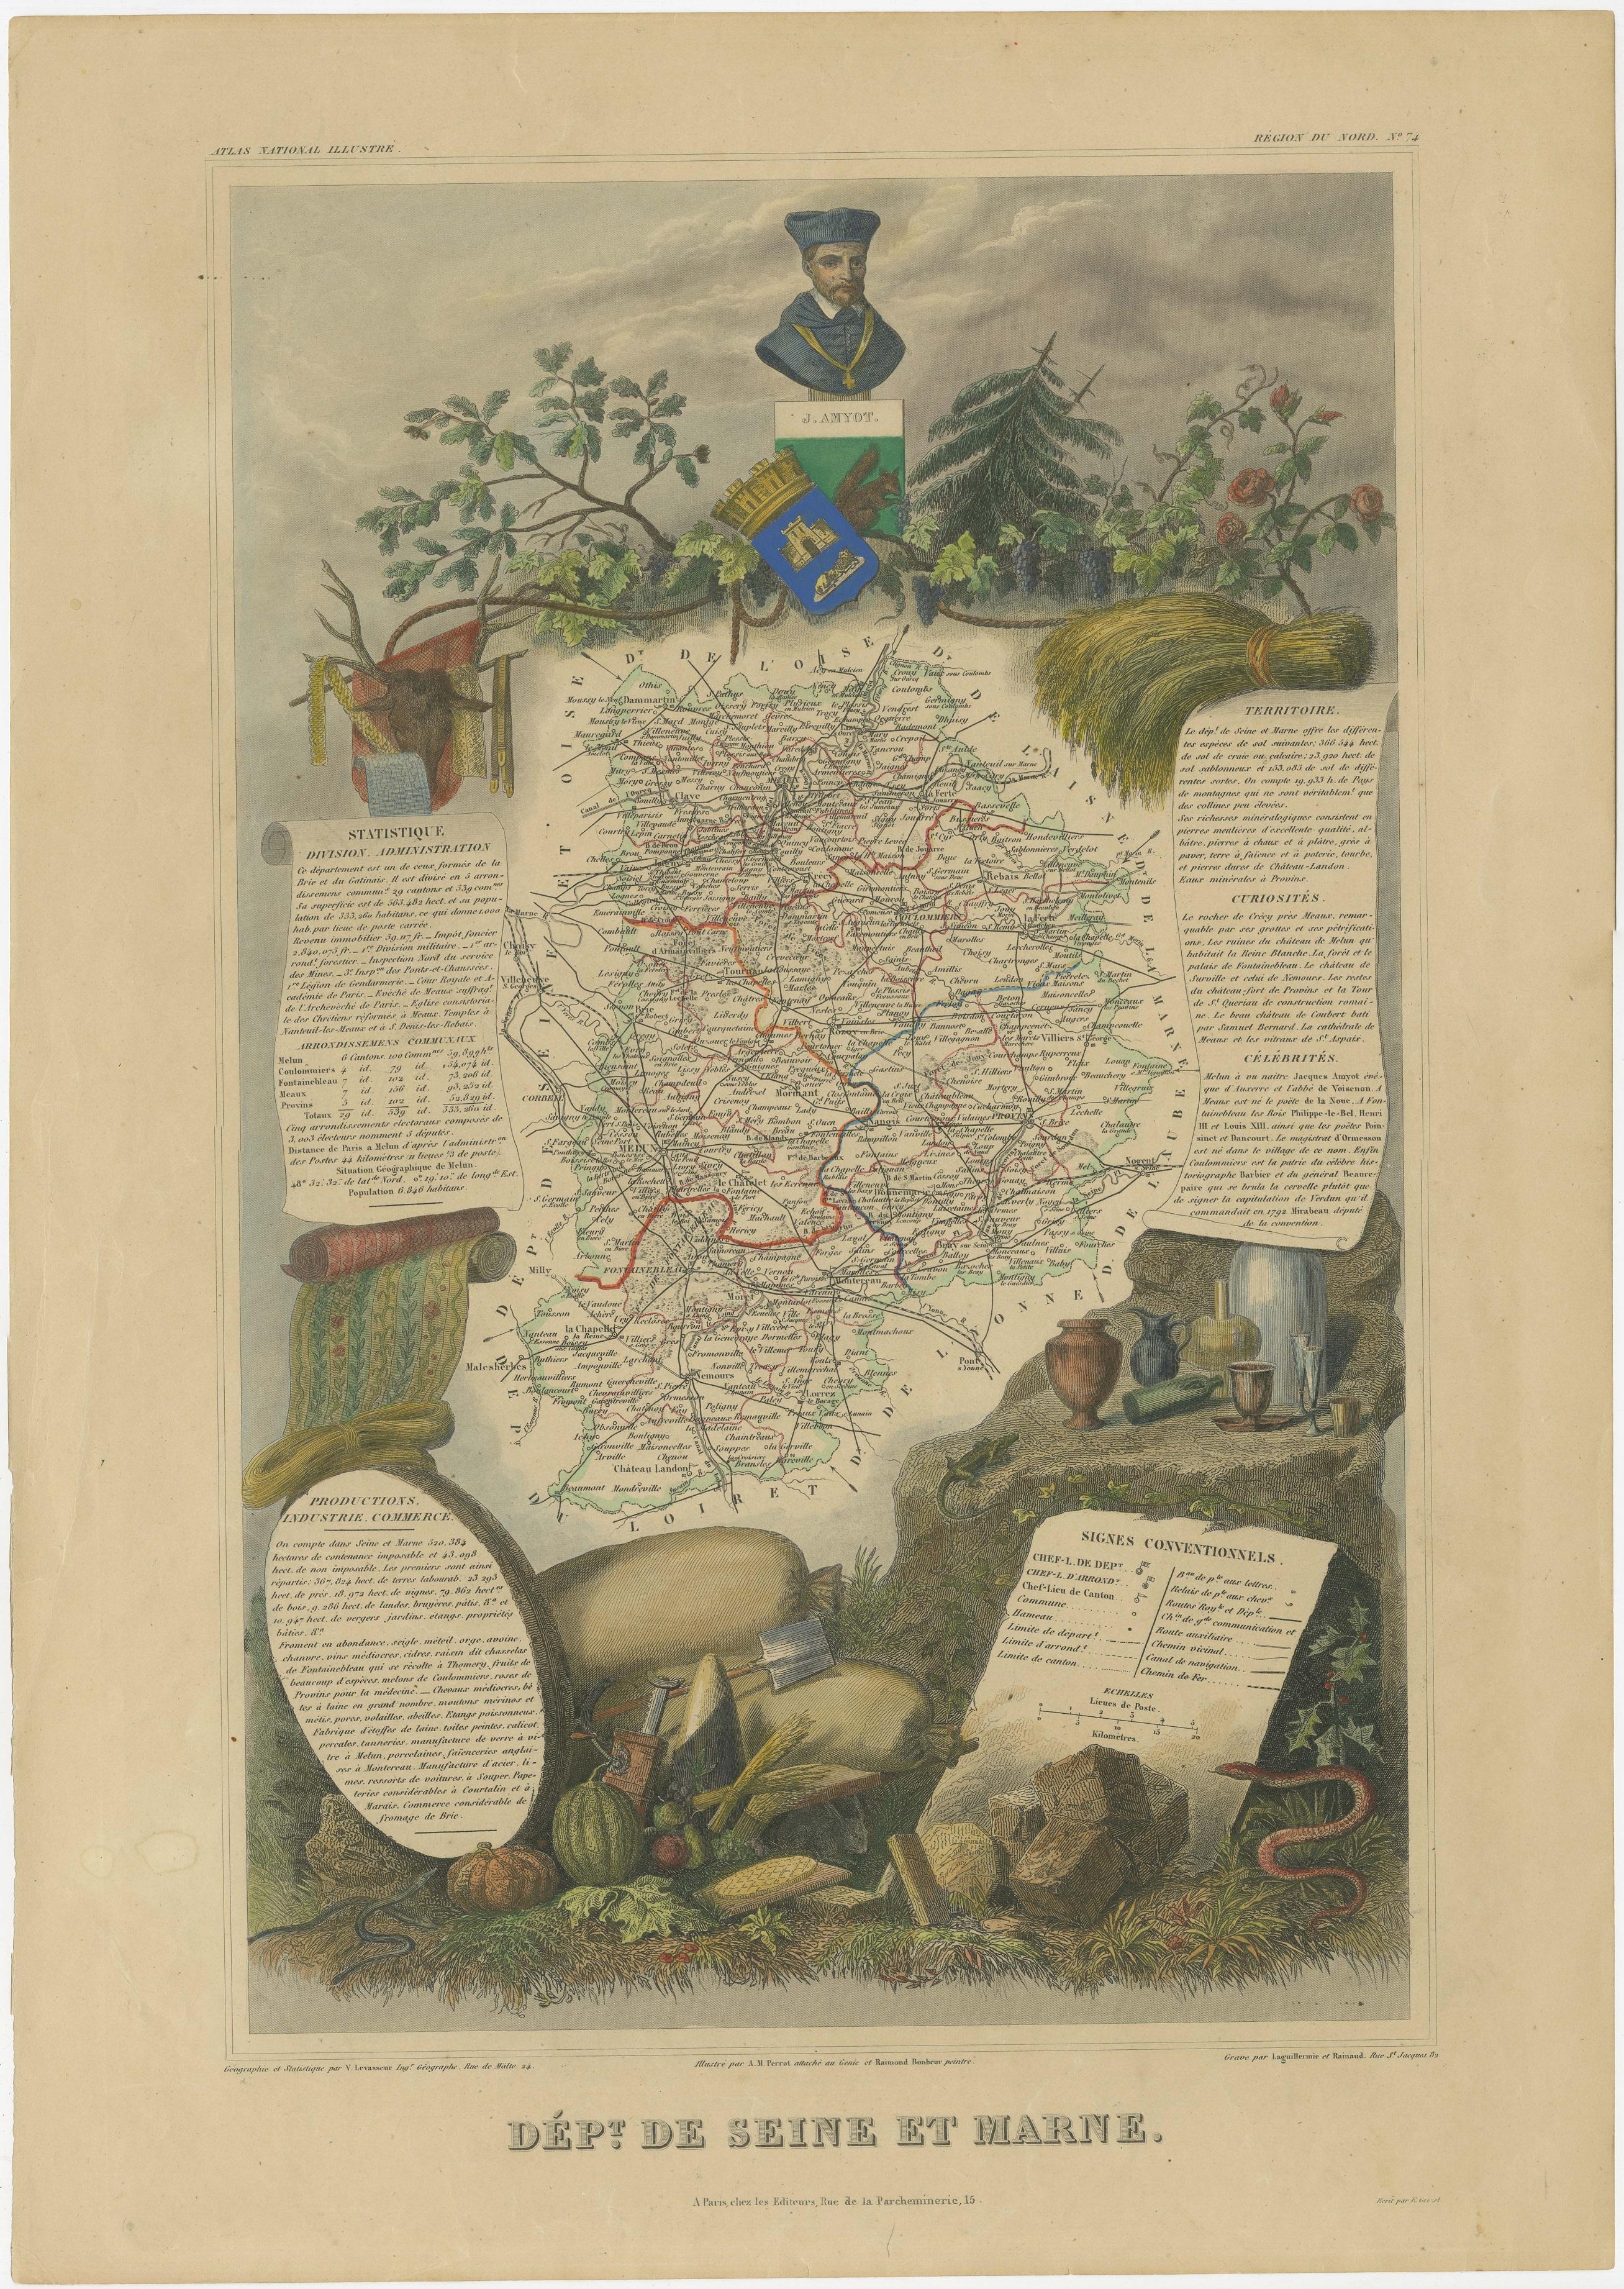 Antique map titled 'Dépt. de Seine et Marne'. map of the French department of Seine Et Marne, France. This region produces a wide variety of wines and hosts an annual wine and cheese fair. This area is known for its production of a brie-style cheese